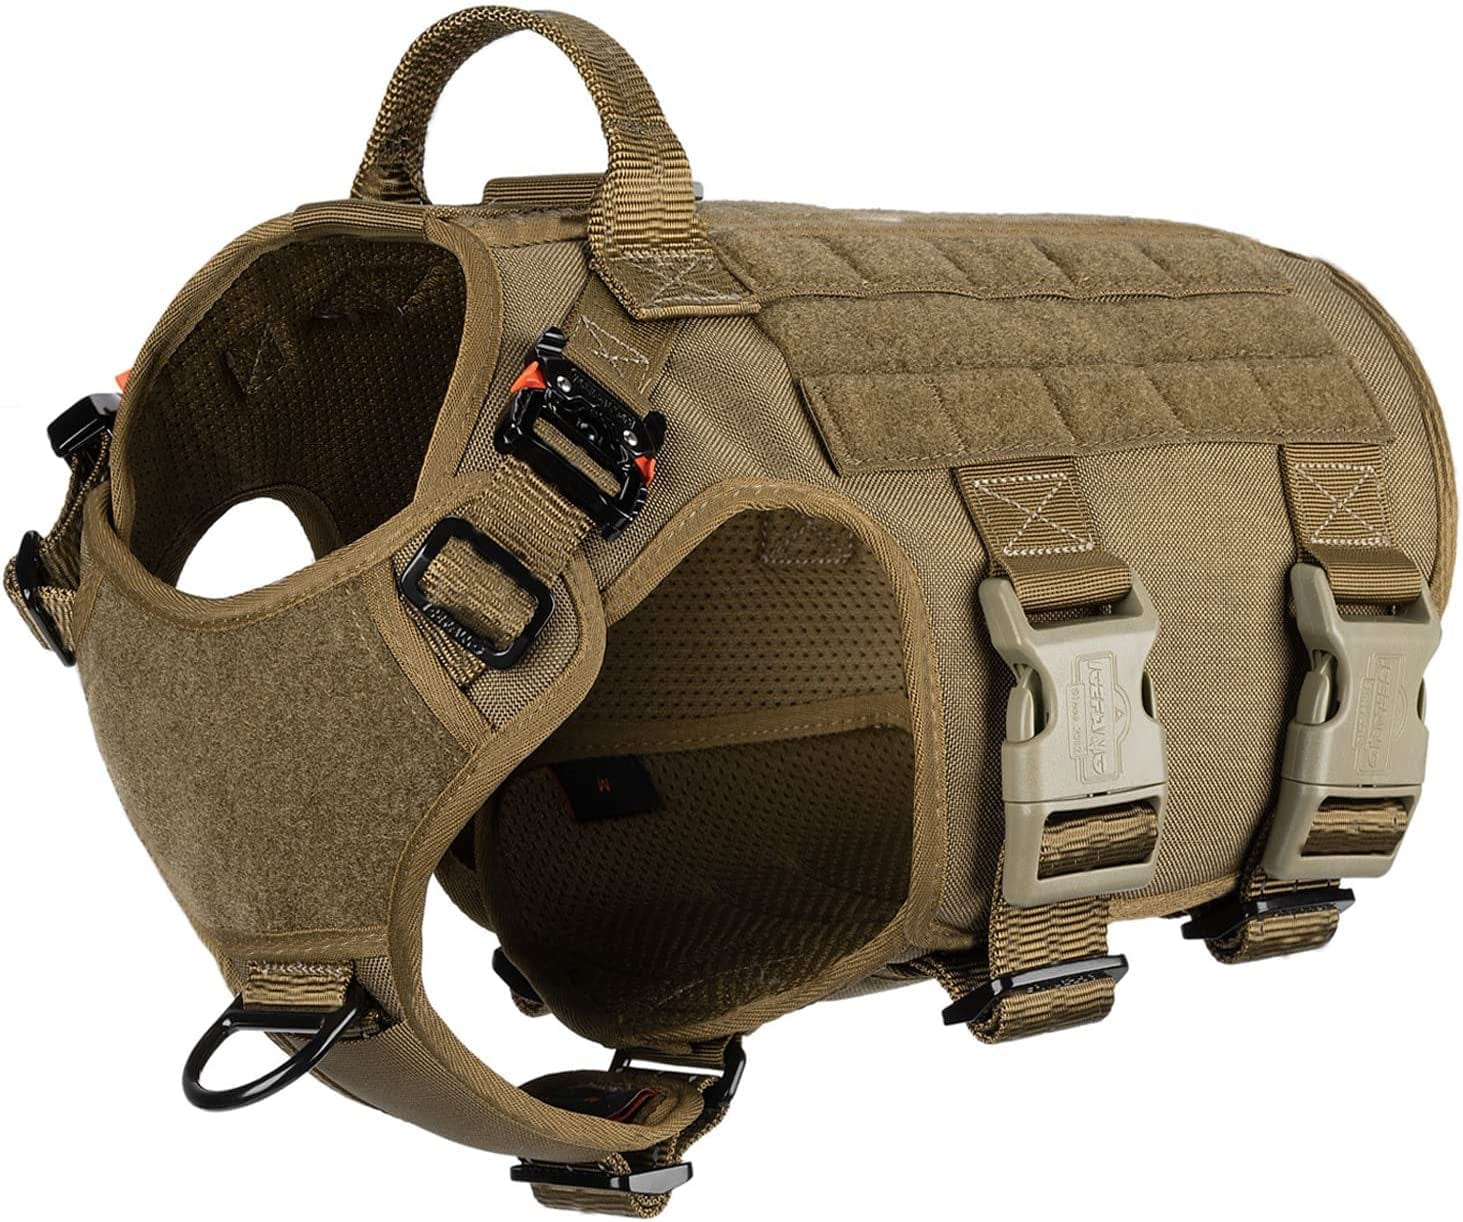 ICEFANG GN5 Tactical Dog Harness,Hook and Loop Panels,Walking Training Work Dog MOLLE Vest with Handle,No Pulling Front Leash Clip,6 X Buckle (L (Neck:18"-24" ; Chest:28"-35"), Brown)